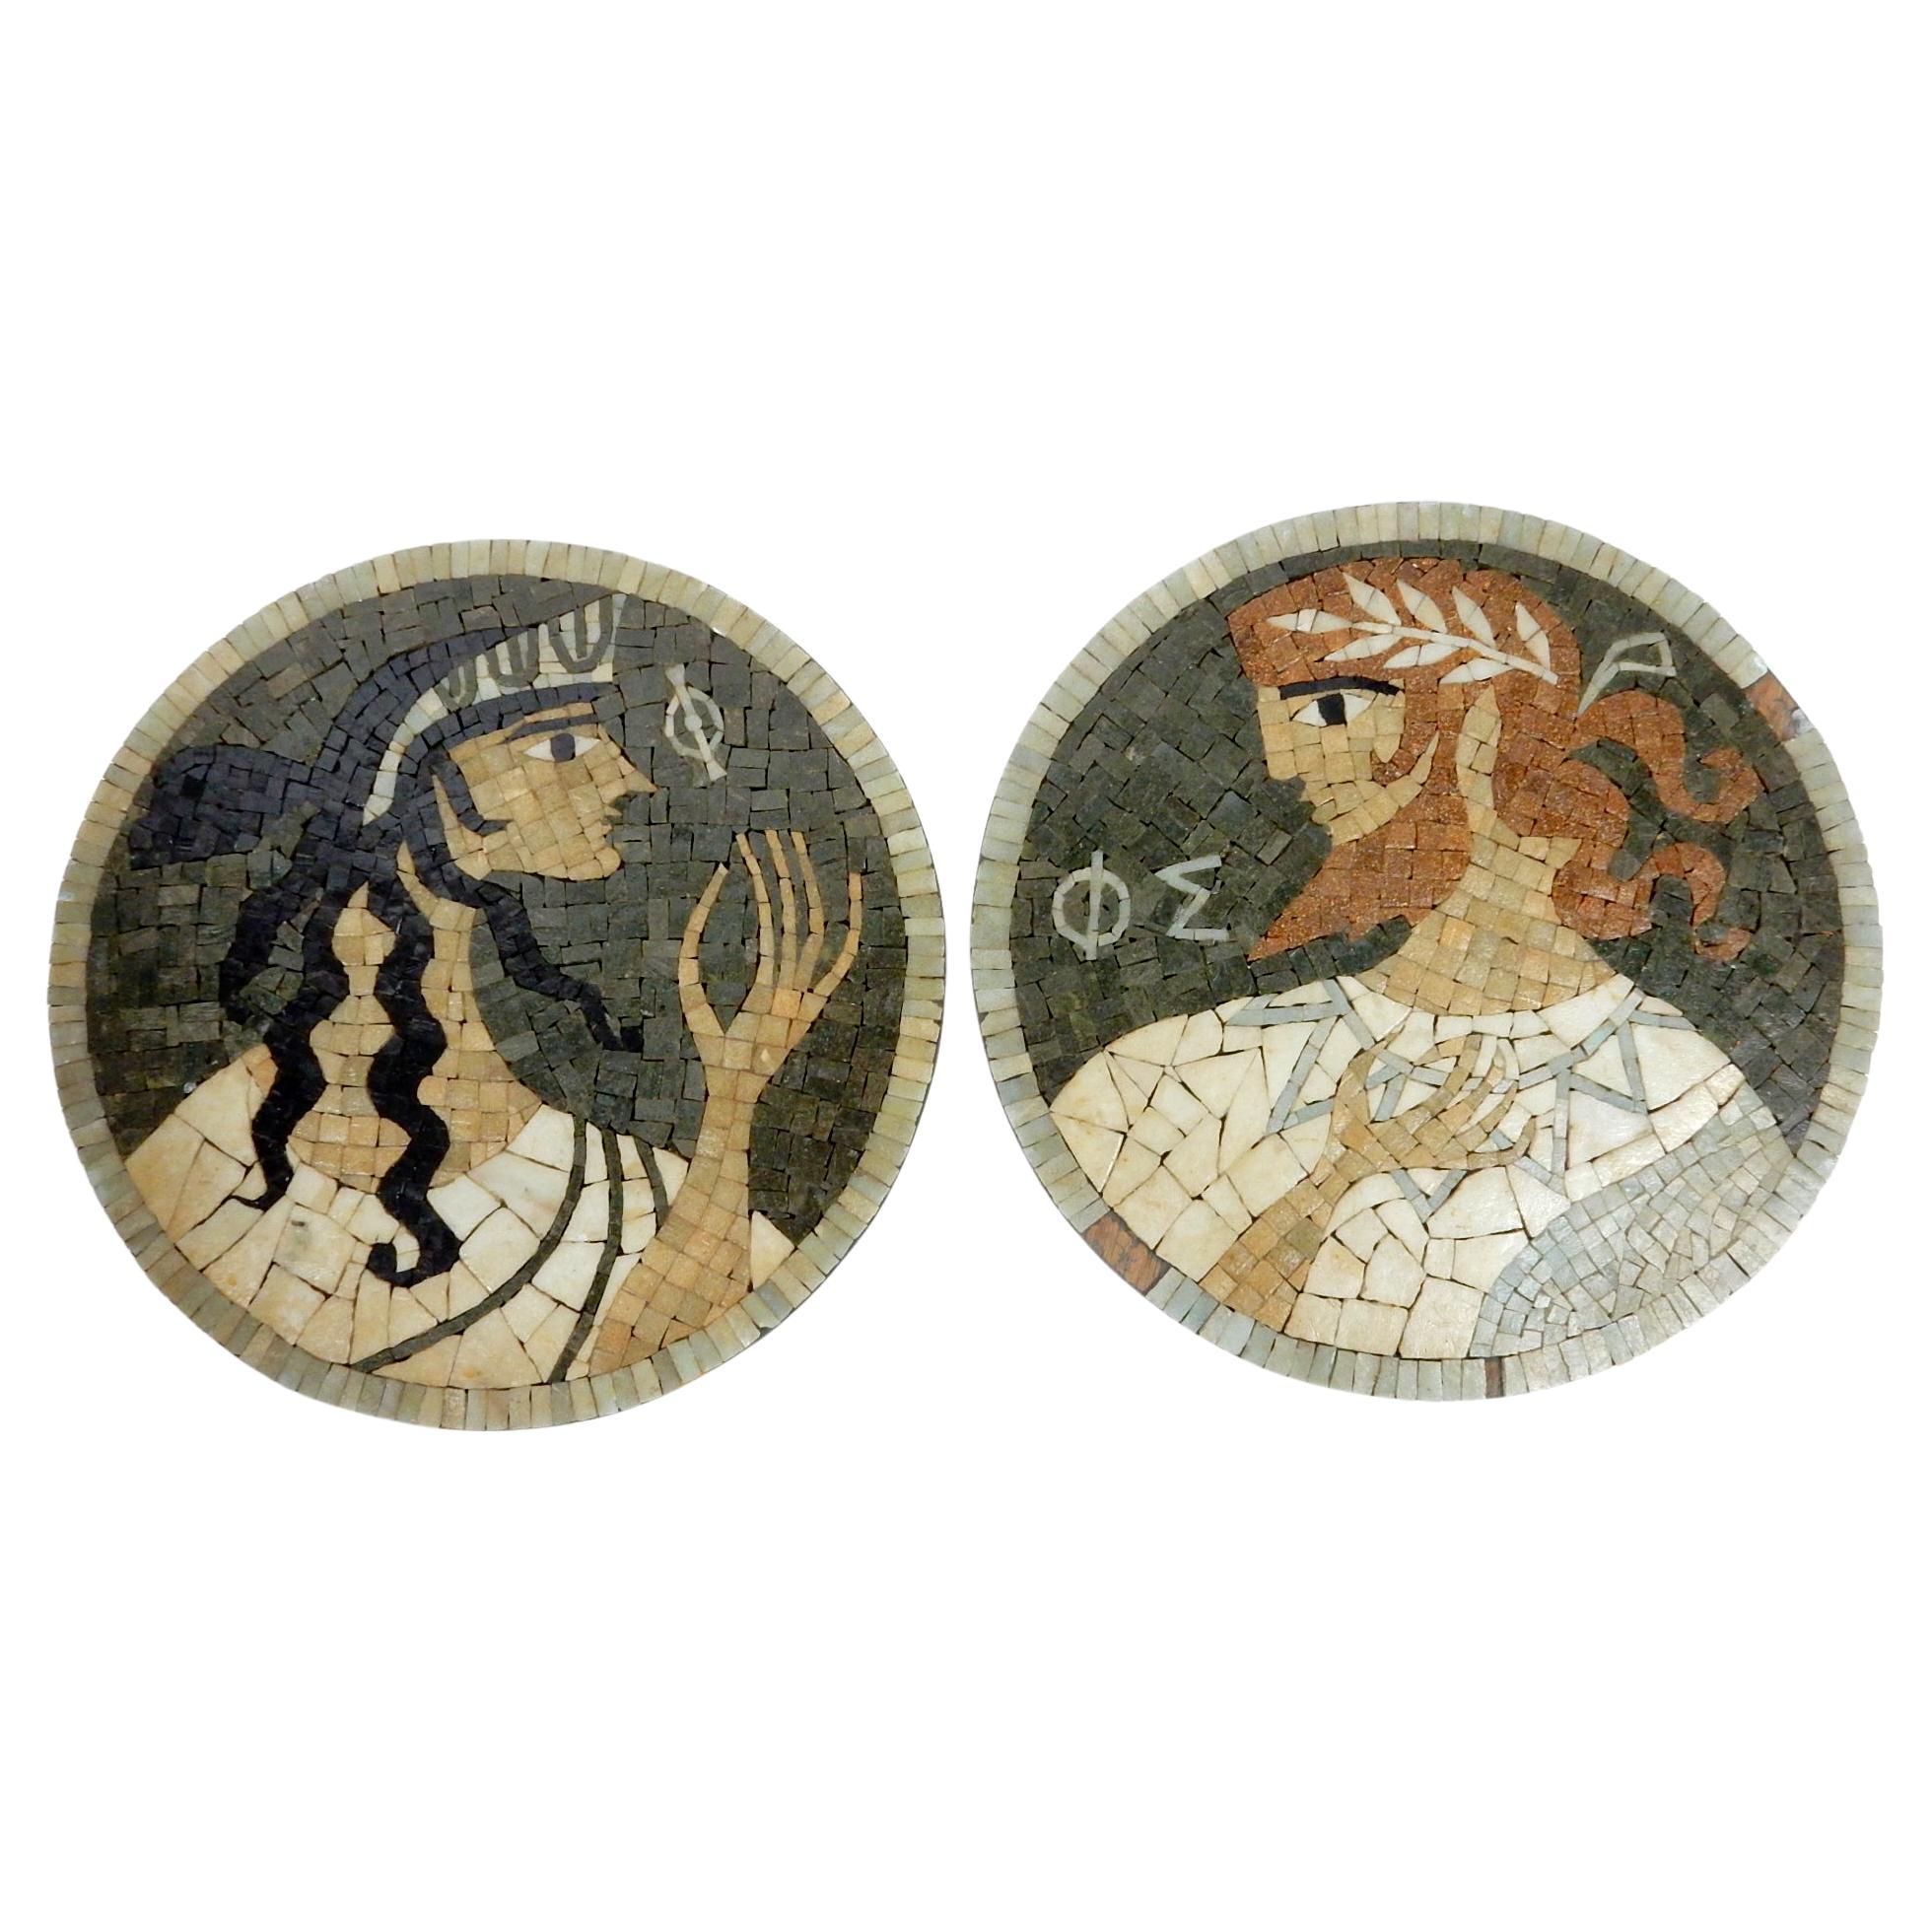 2 part mosaic wall art sculpture attributed to Evelyn and Jerome Ackerman.
We say attributed because the paper label on back of each was removed or over time the glue dried
and they fell off.
These are Identical in size, mounting hardware and